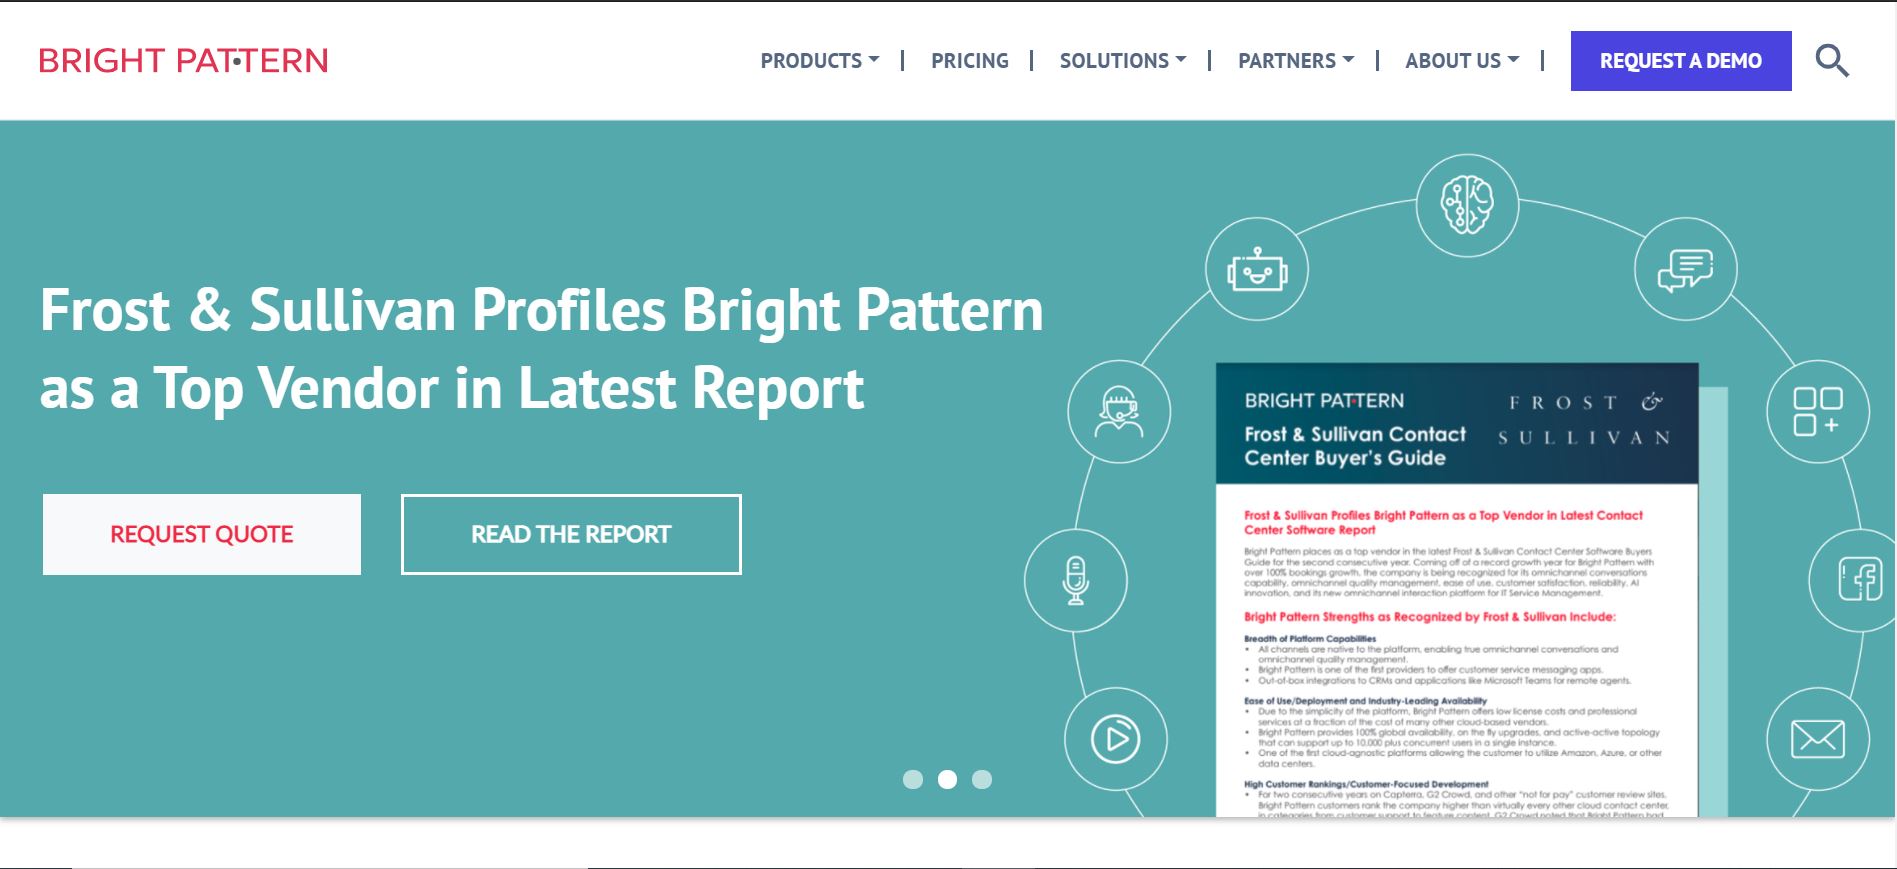 Detailed reviews and information for remote teams Bright Pattern